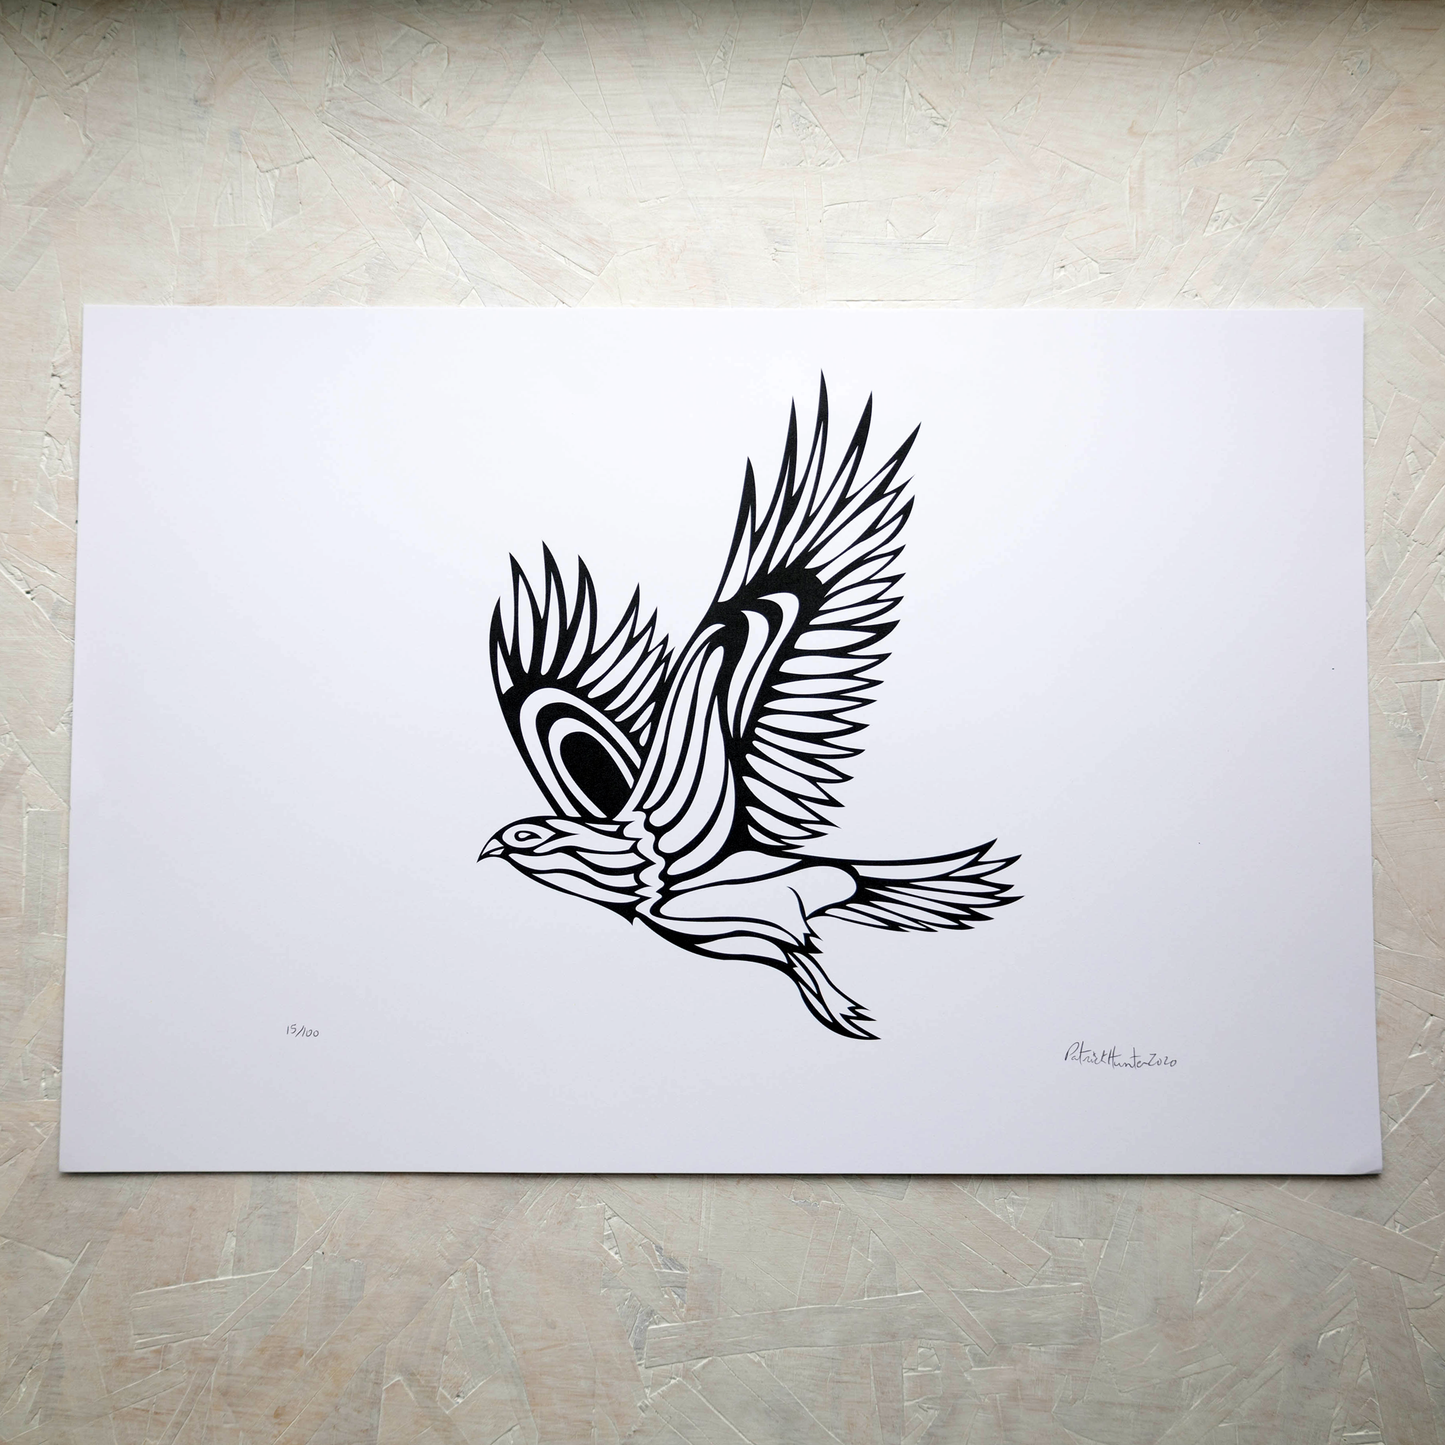 Print of Patrick Hunter's painting of a hawk in flight in black and white, woodland art style.